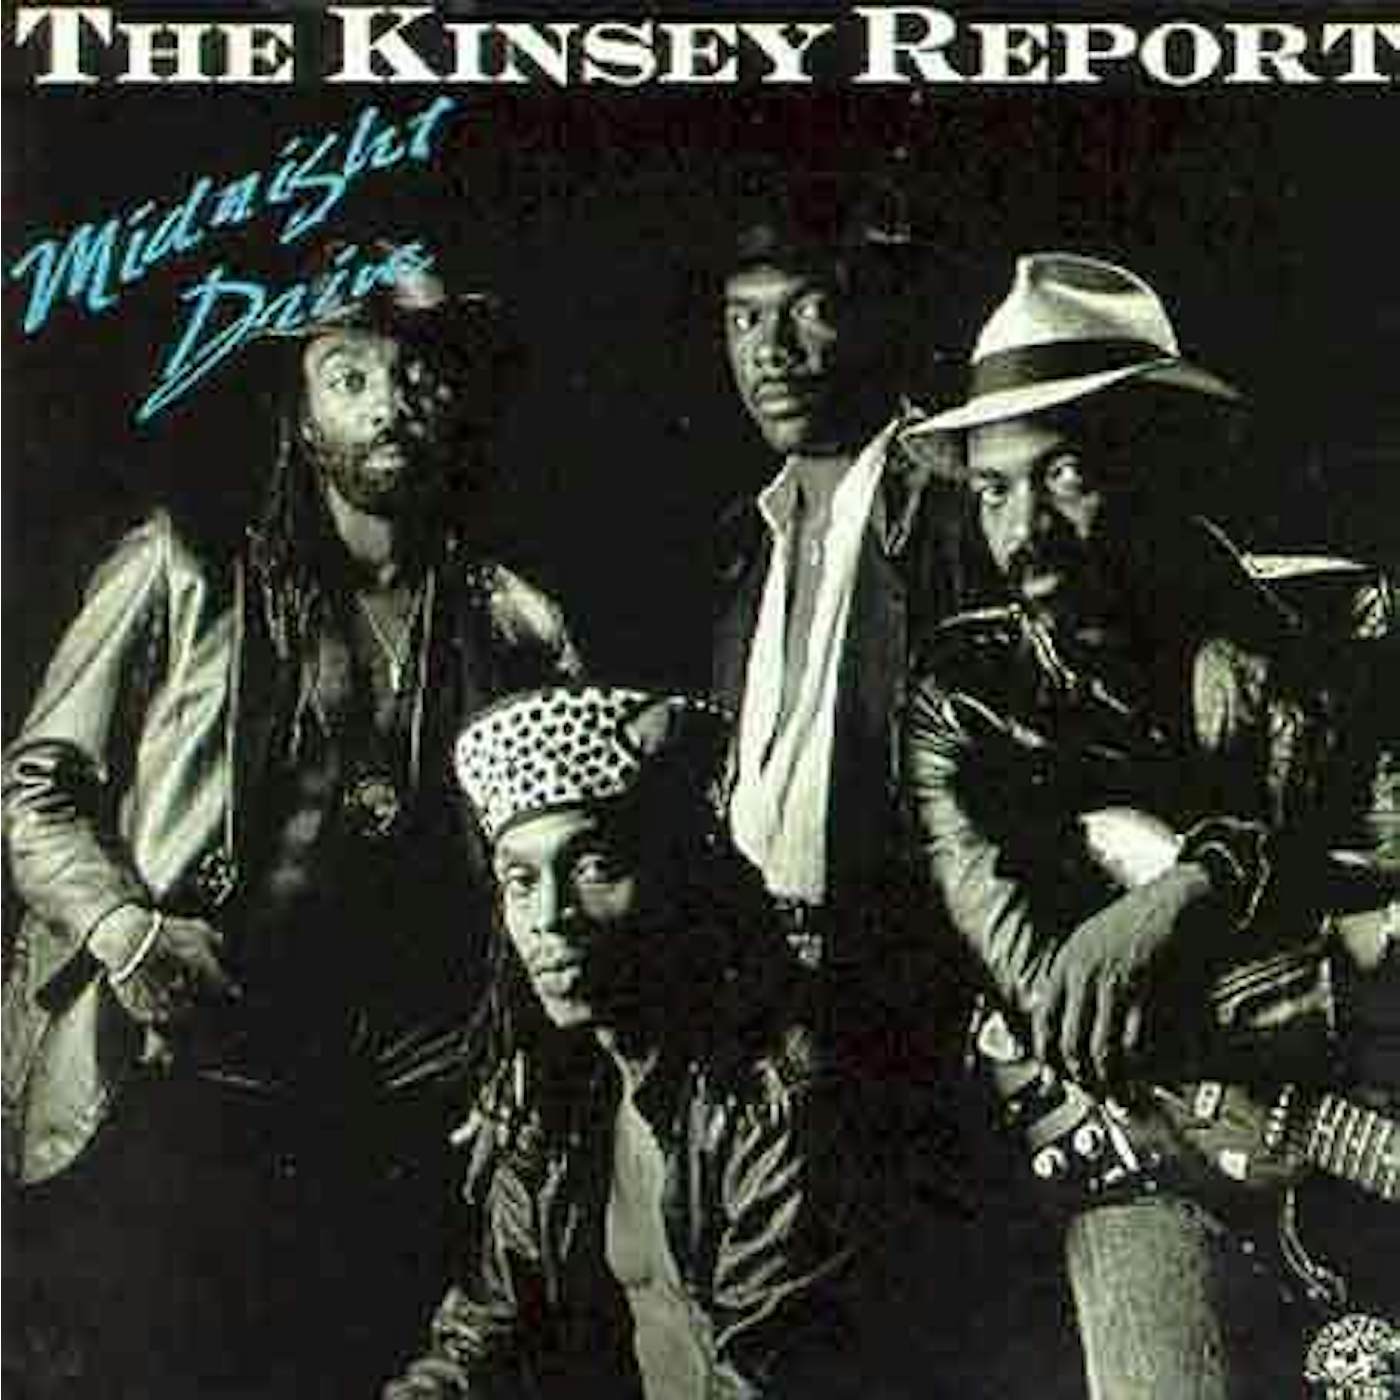 The Kinsey Report MIDNIGHT DRIVE CD